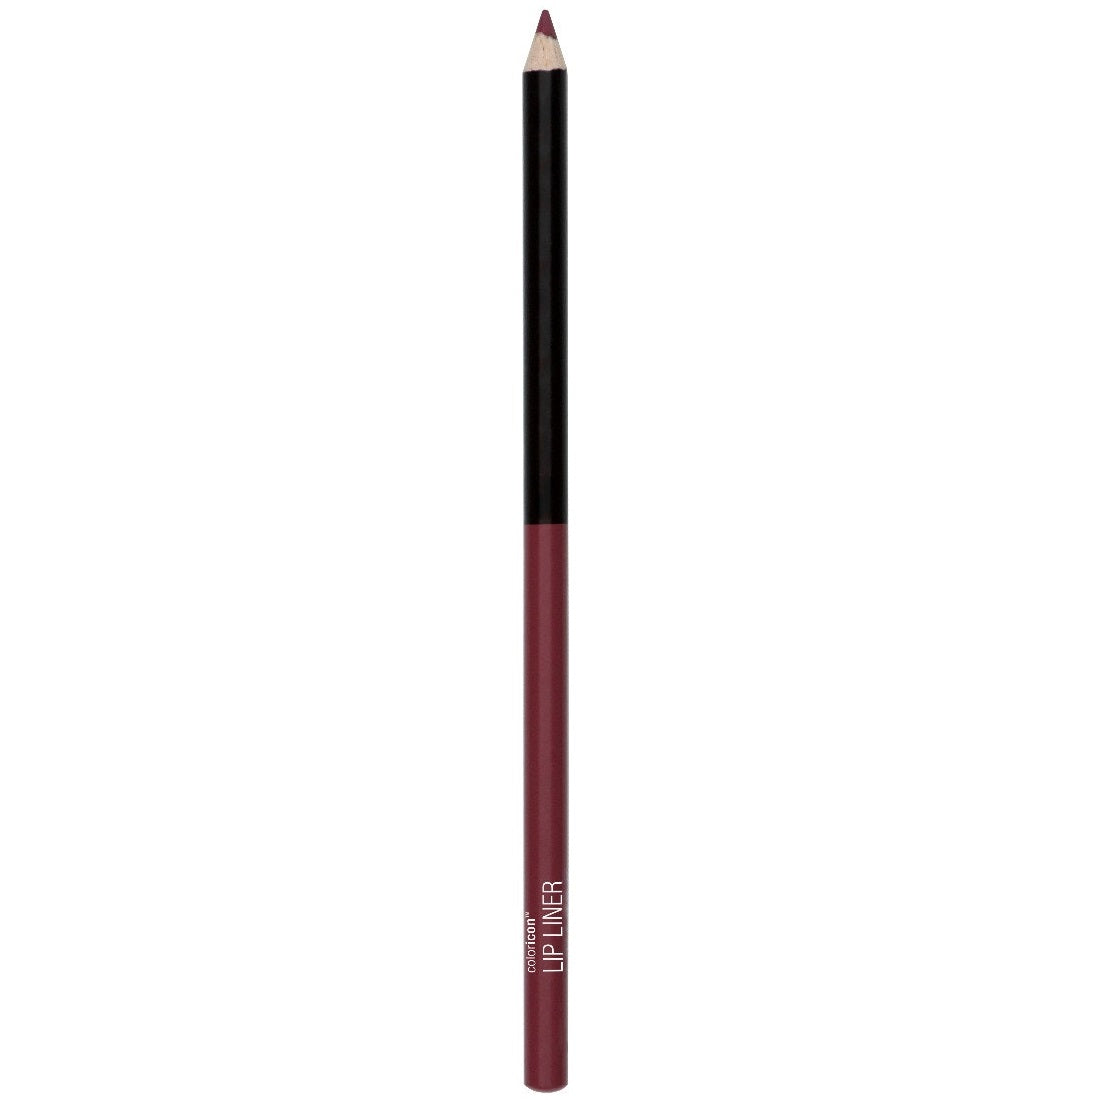 WET N WILD Color Icon Lipliner Pencil - Plumberry